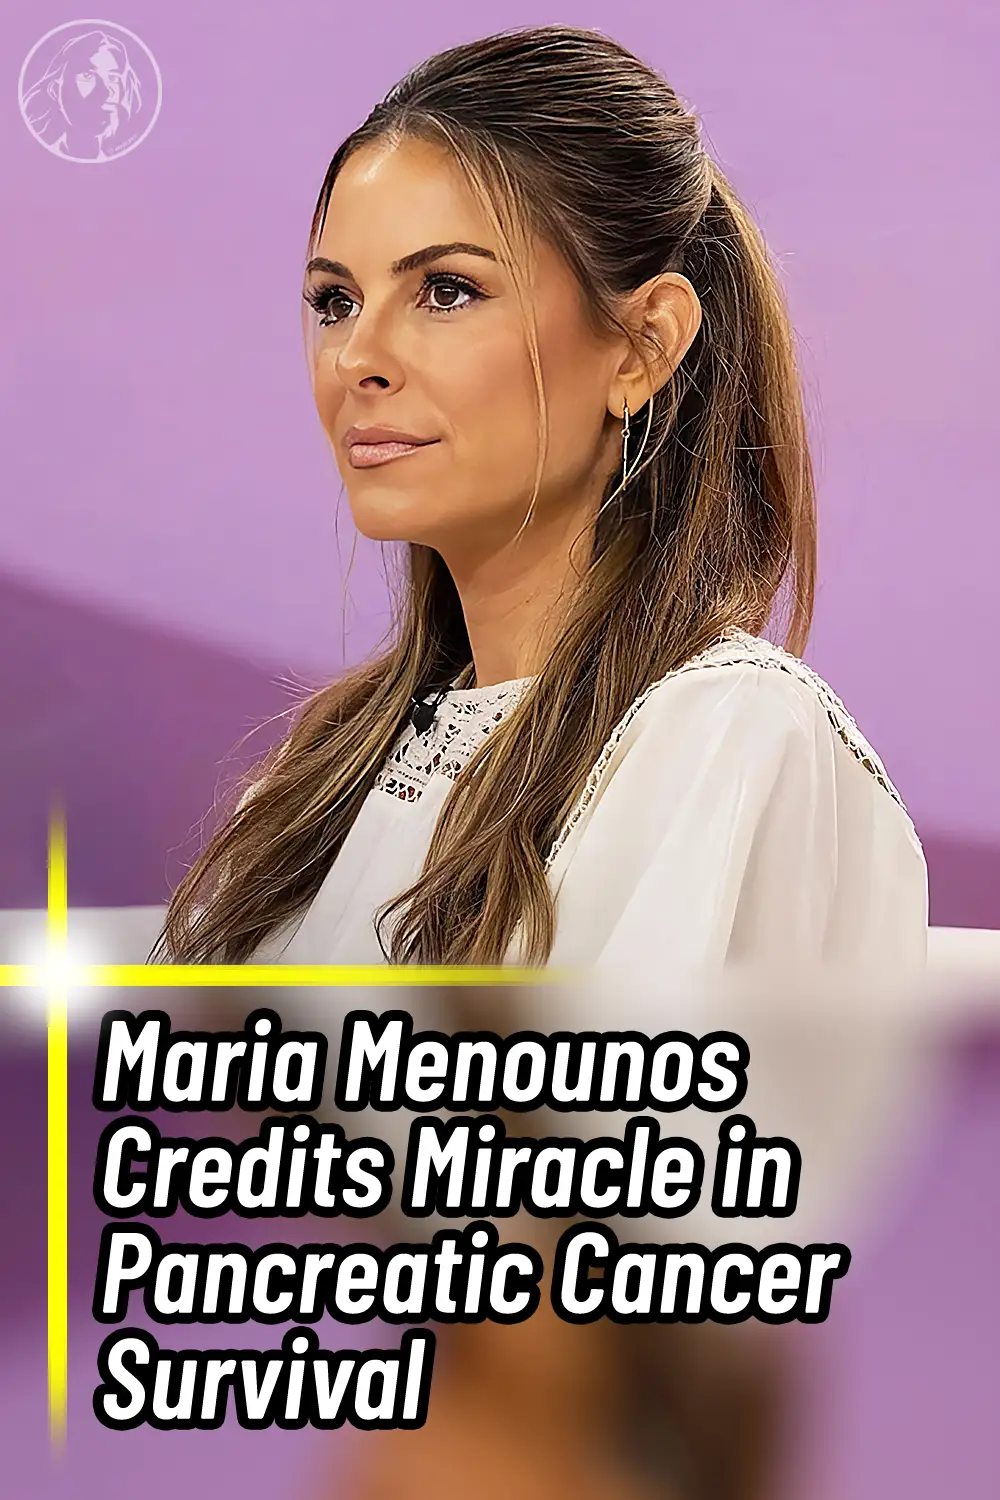 Maria Menounos Credits Miracle in Pancreatic Cancer Survival